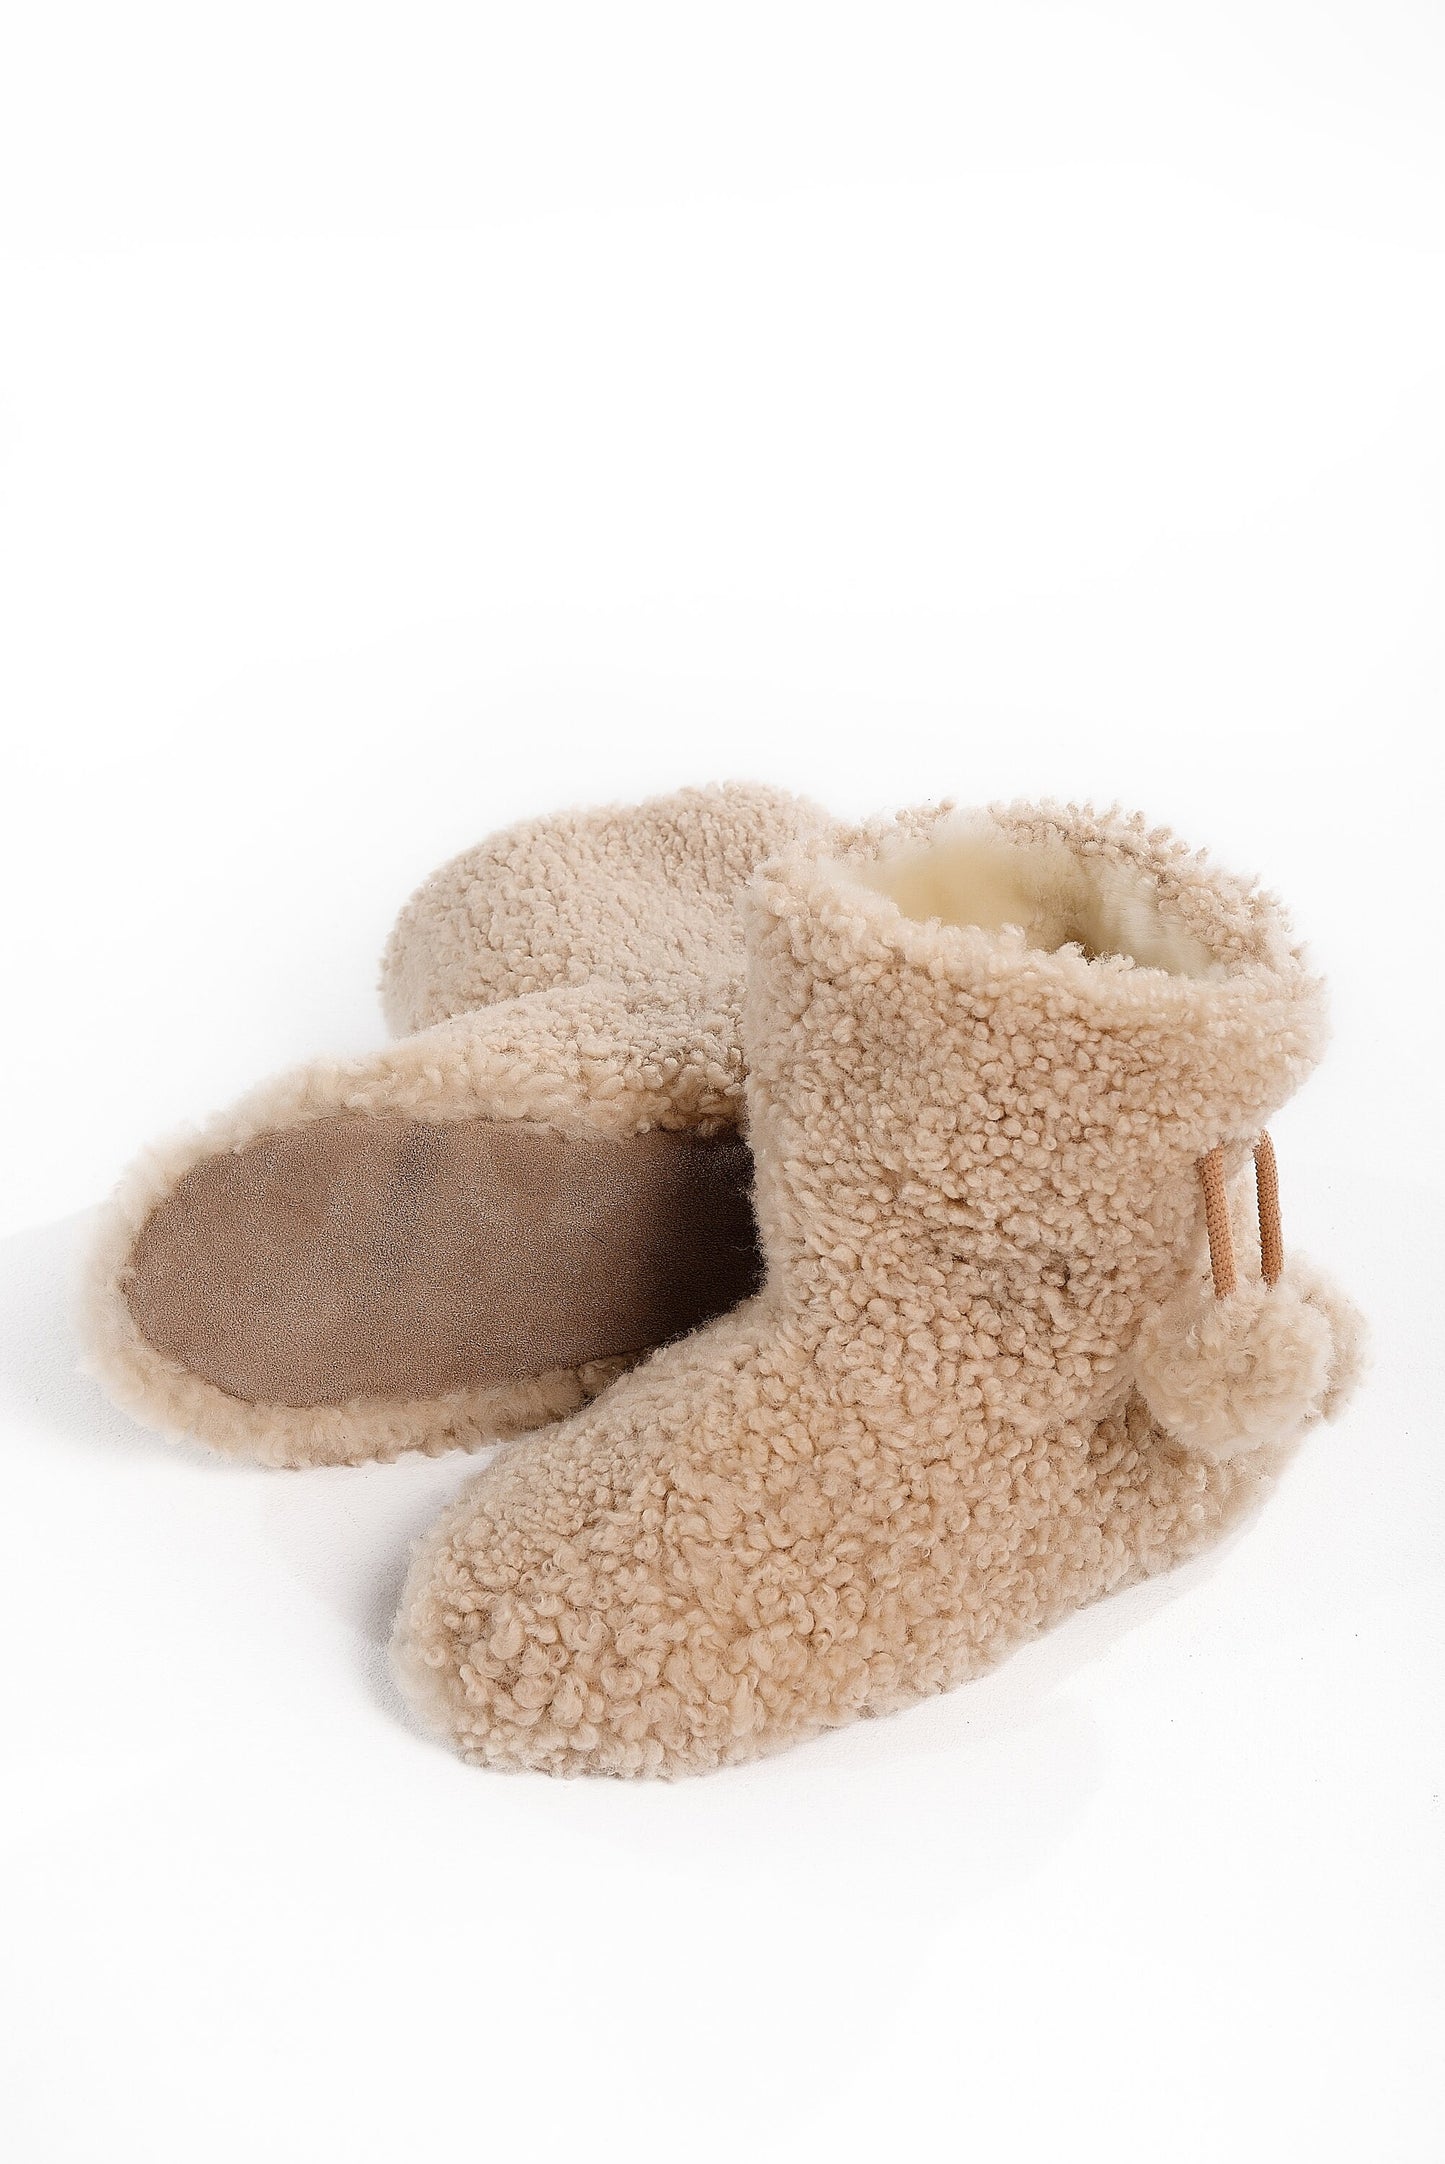 Real Womens Boucle Sheepskin Slipper Home Boots in Beige Color With Pom Pom